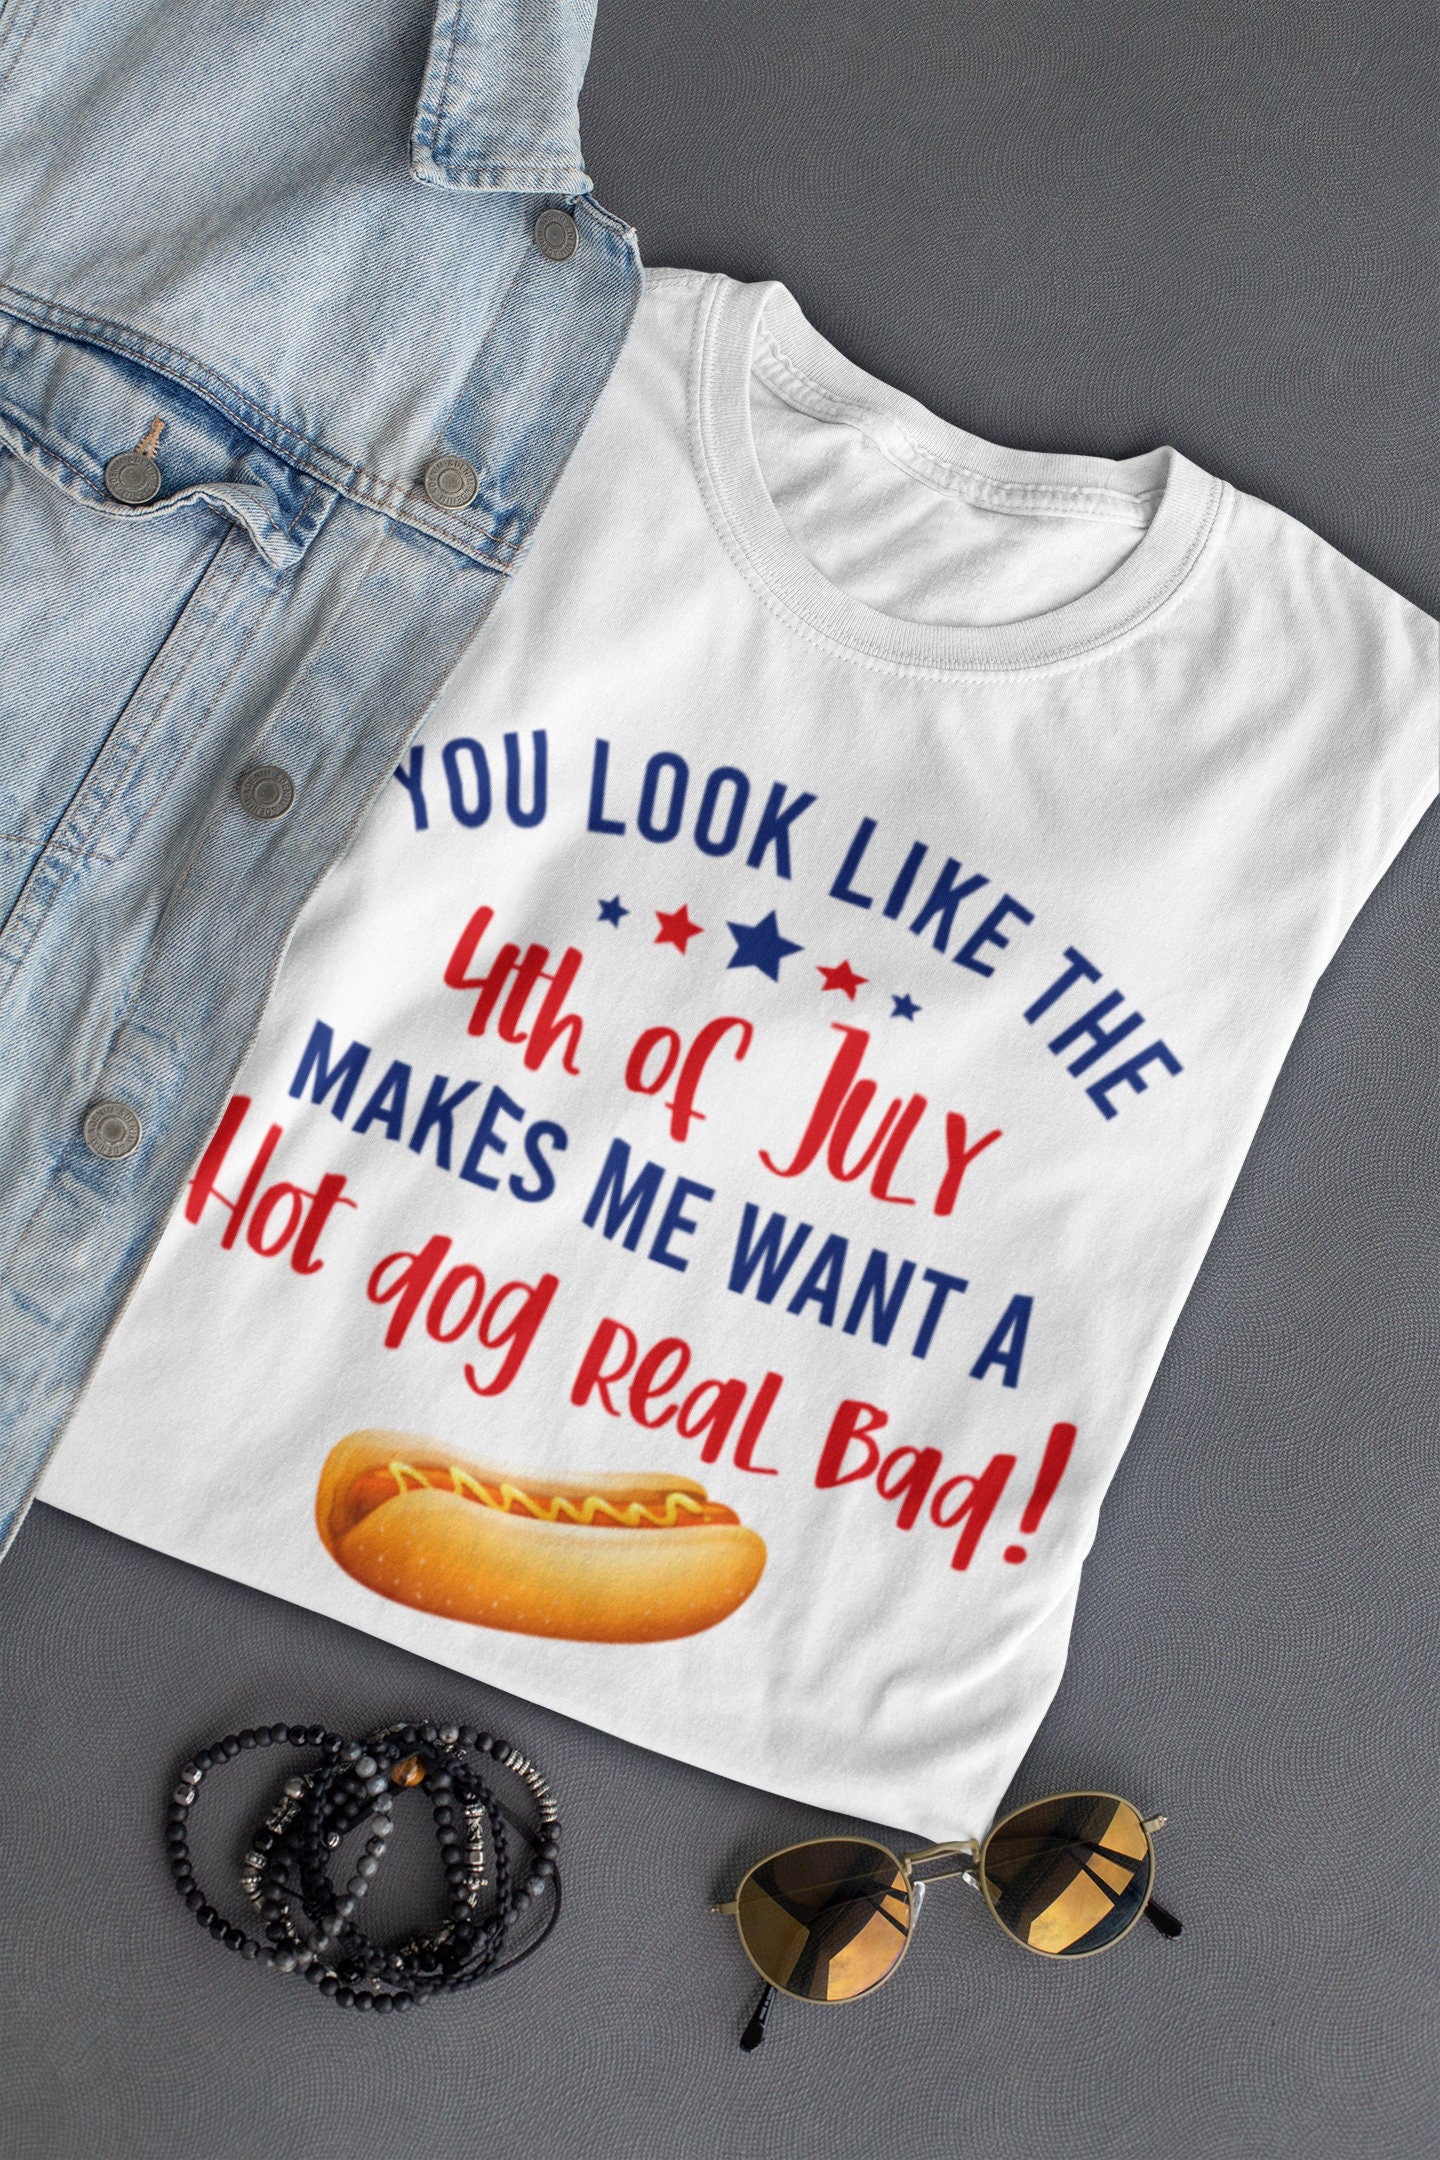 You Look Like the 4th of July, Makes me Want a hot dog real bad! - Fourth of July summer tank top/ t-shirt